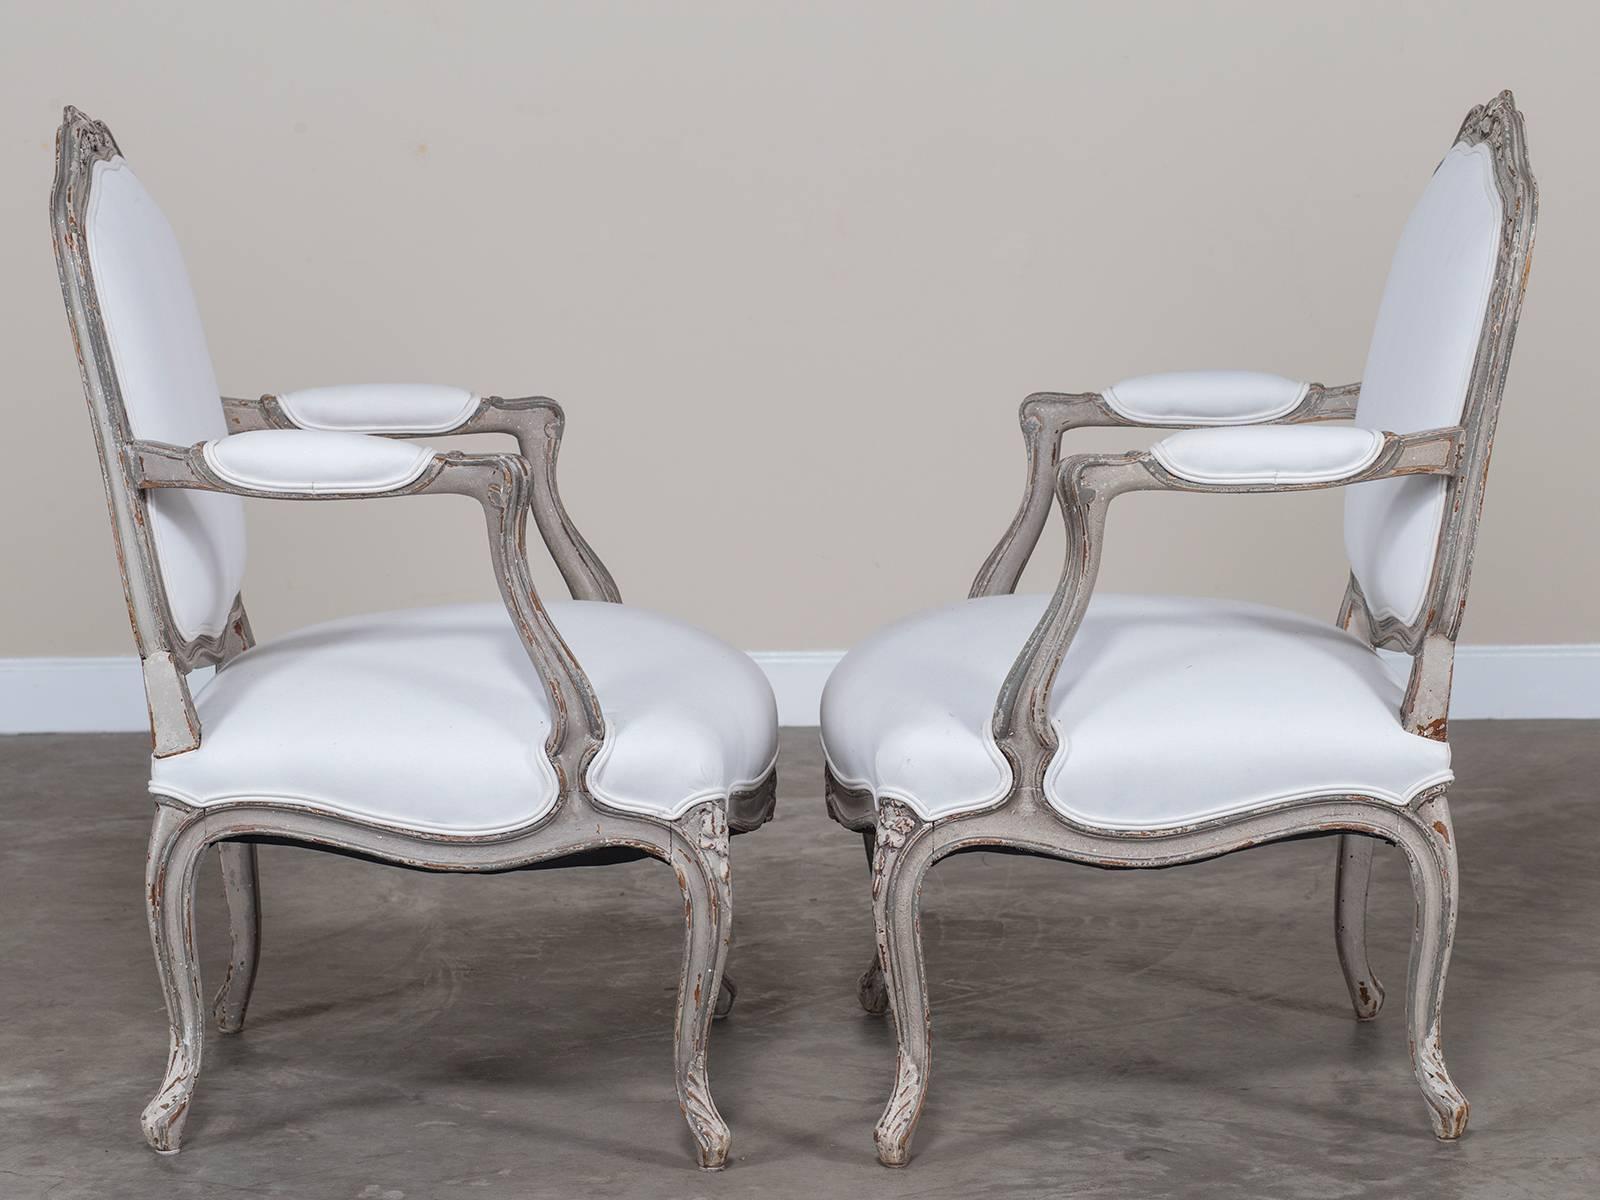 Receive our new selections direct from 1stdibs by email each week. Please click Follow Dealer below and see them first!

This attractive pair of antique French Louis XV style painted armchairs circa 1880 embodies the sensuous feel of eighteenth